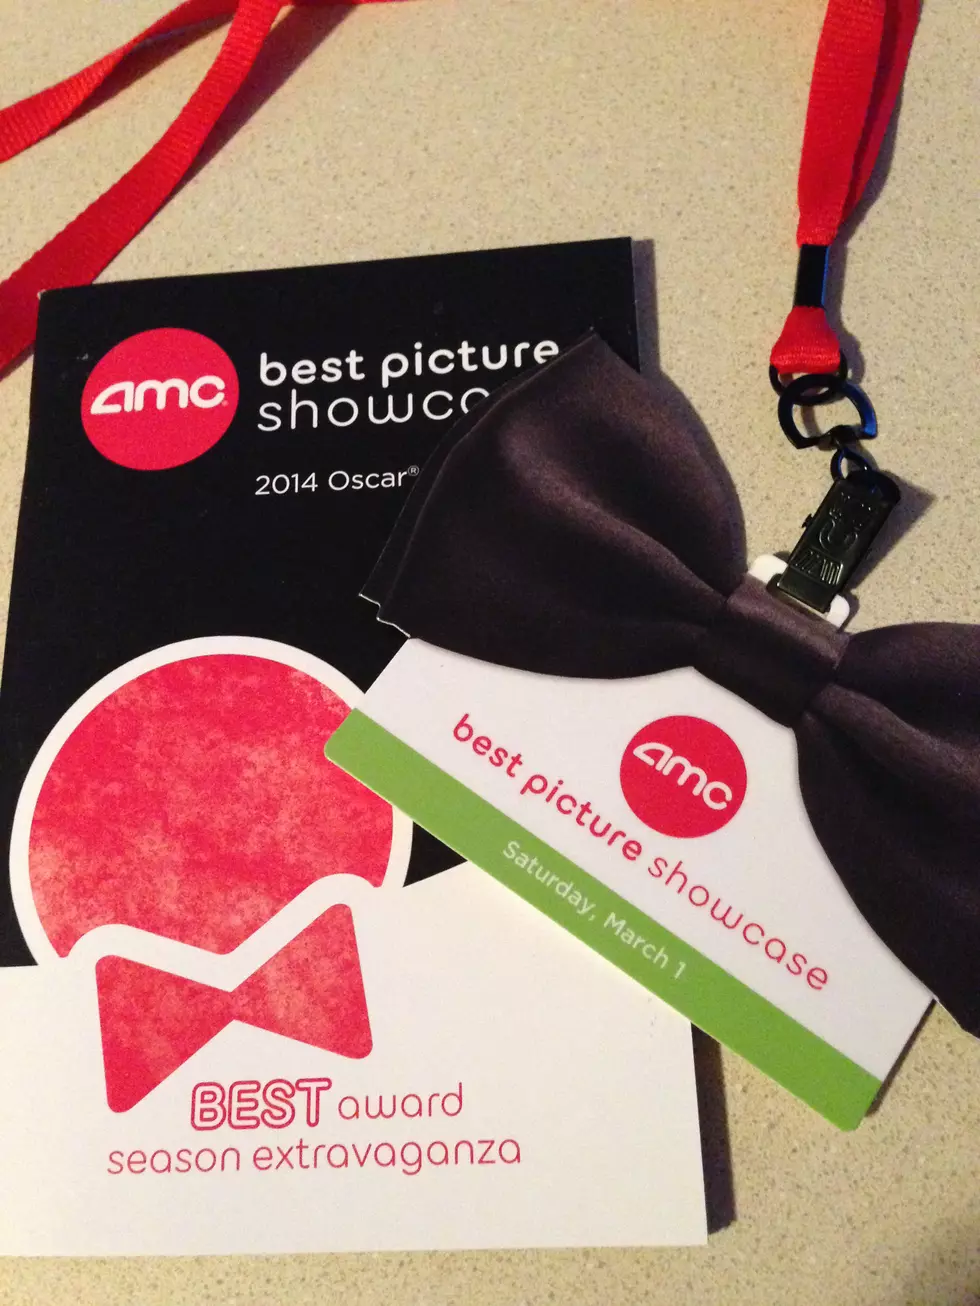 AMC Theaters Best Picture Showcase: My (Entire) Saturday At The Movies